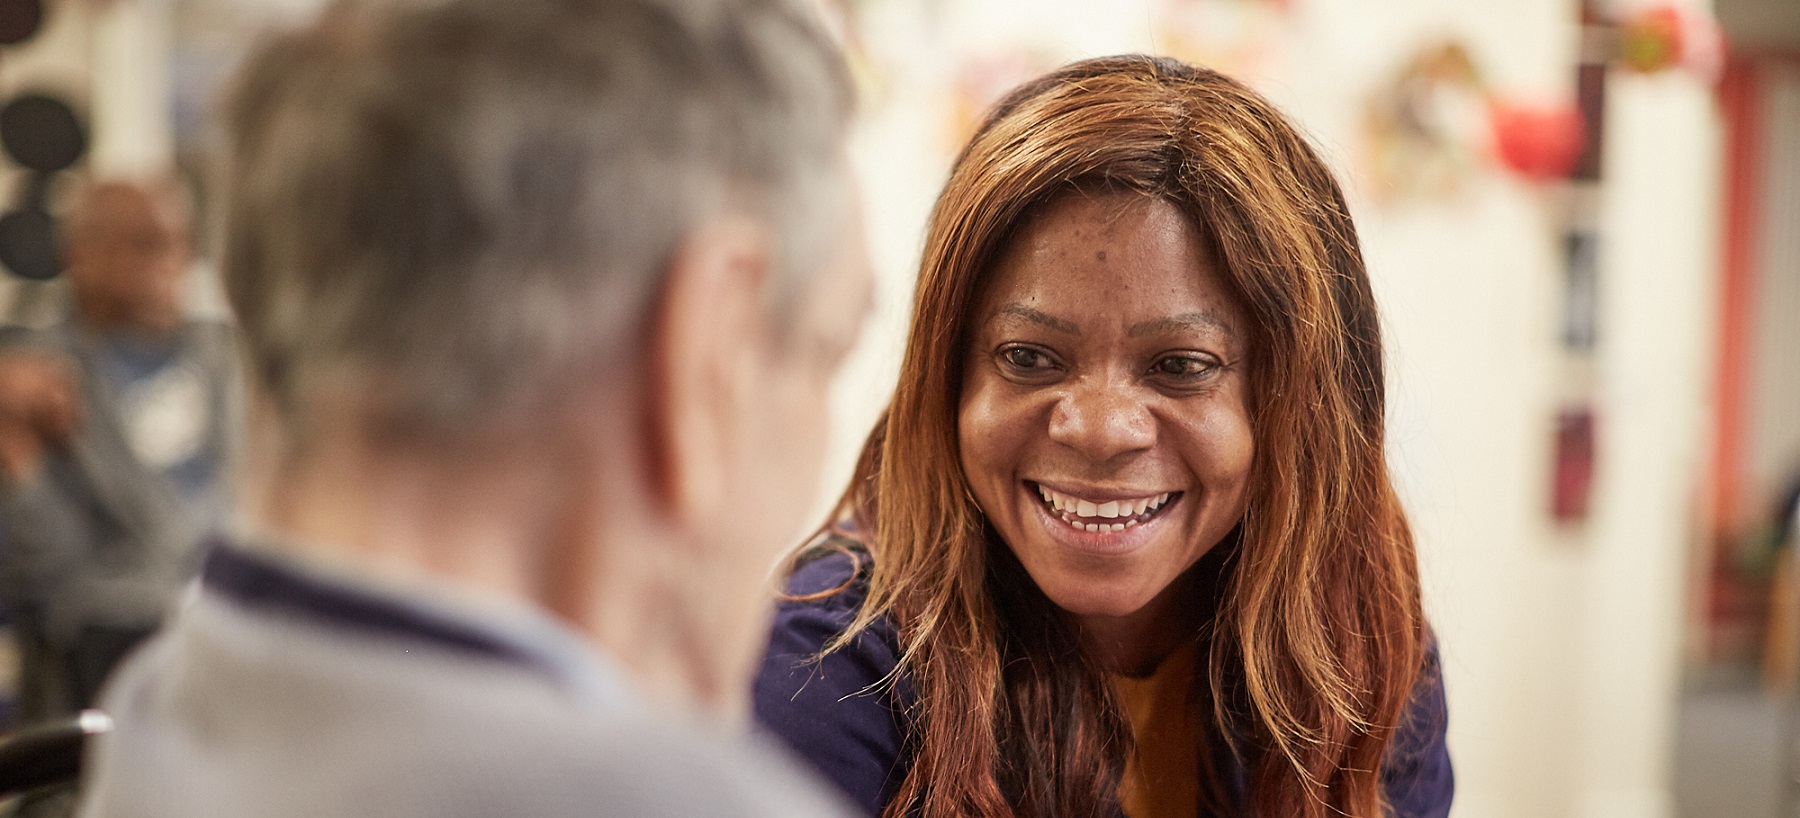 Lambeth Wellbeing Fund – grants now available to create community connections and improve wellbeing